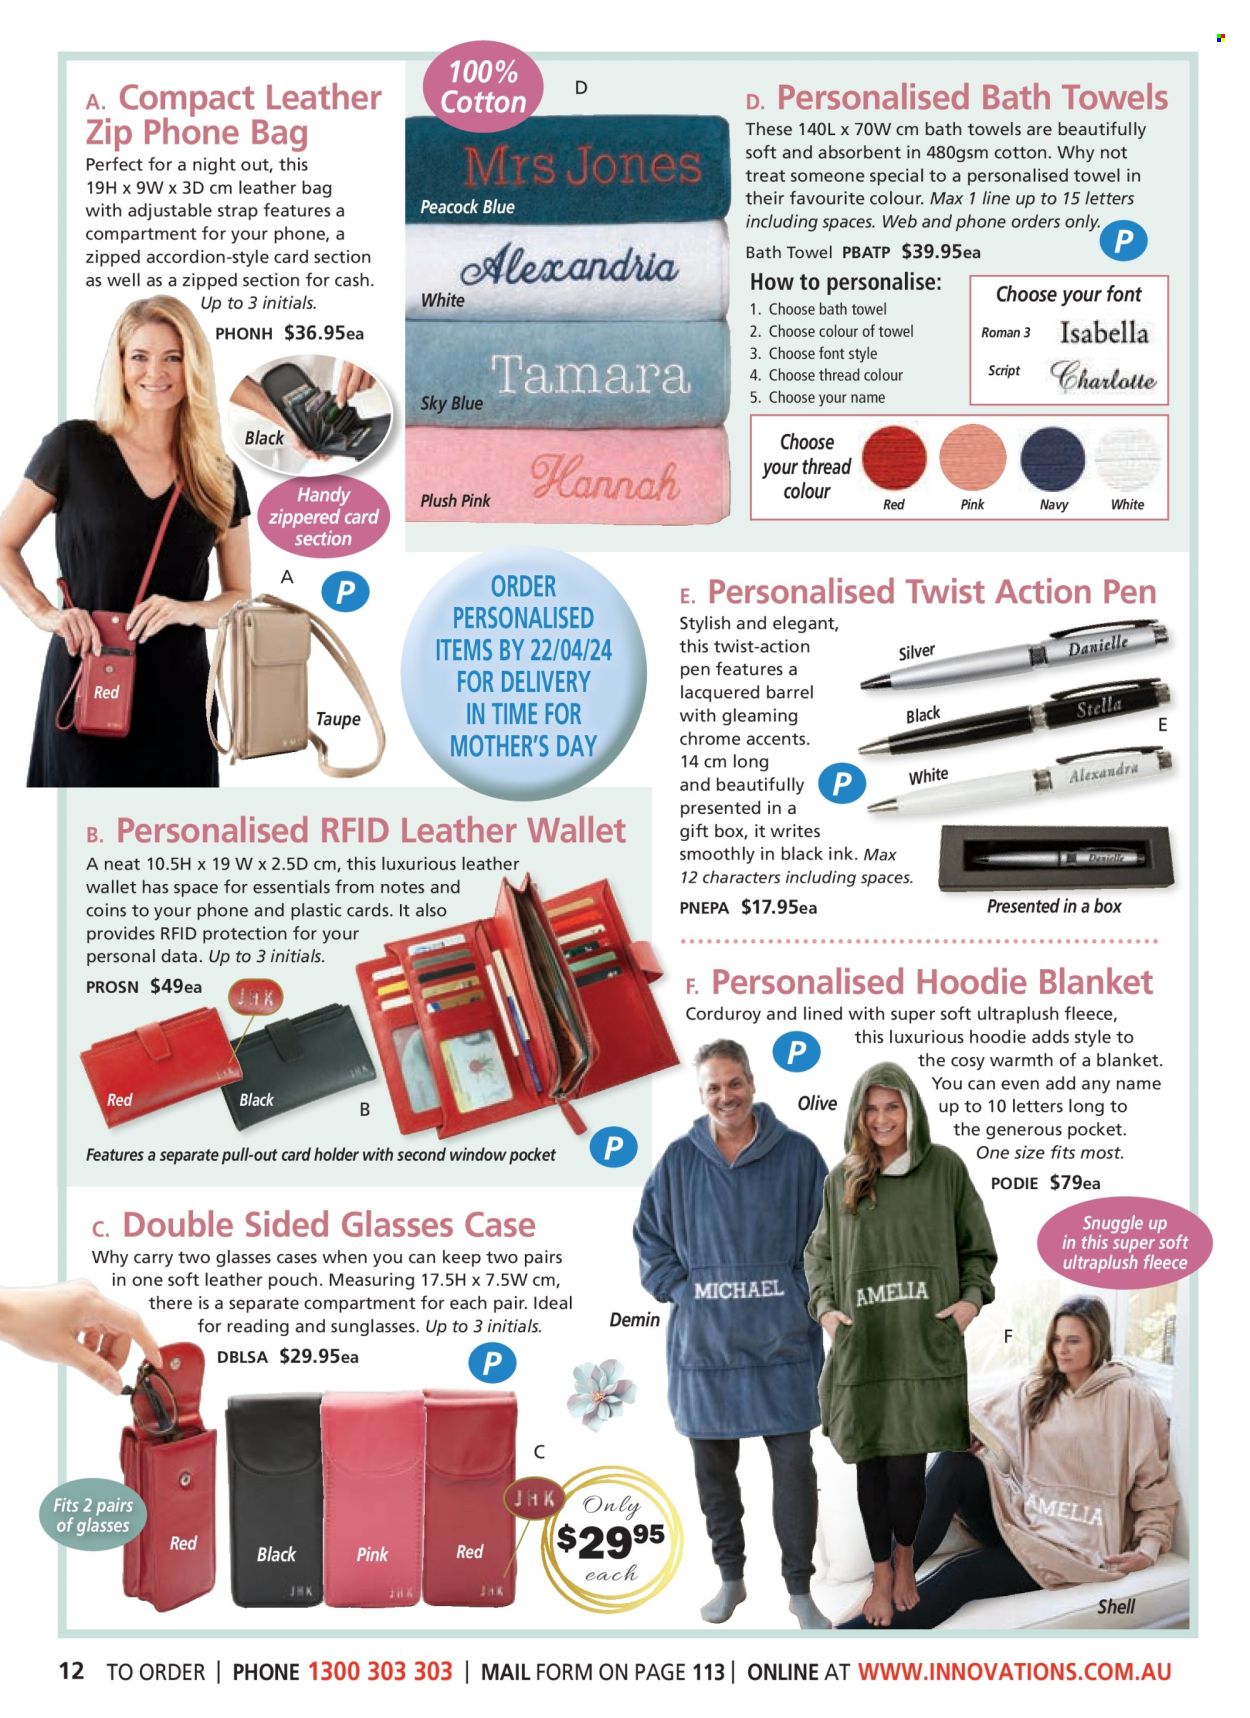 thumbnail - Innovations Catalogue - Sales products - pen, gift box, bag, thread, blanket, bath towel, towel, hoodie, leather bag, sunglasses, leather wallet. Page 12.